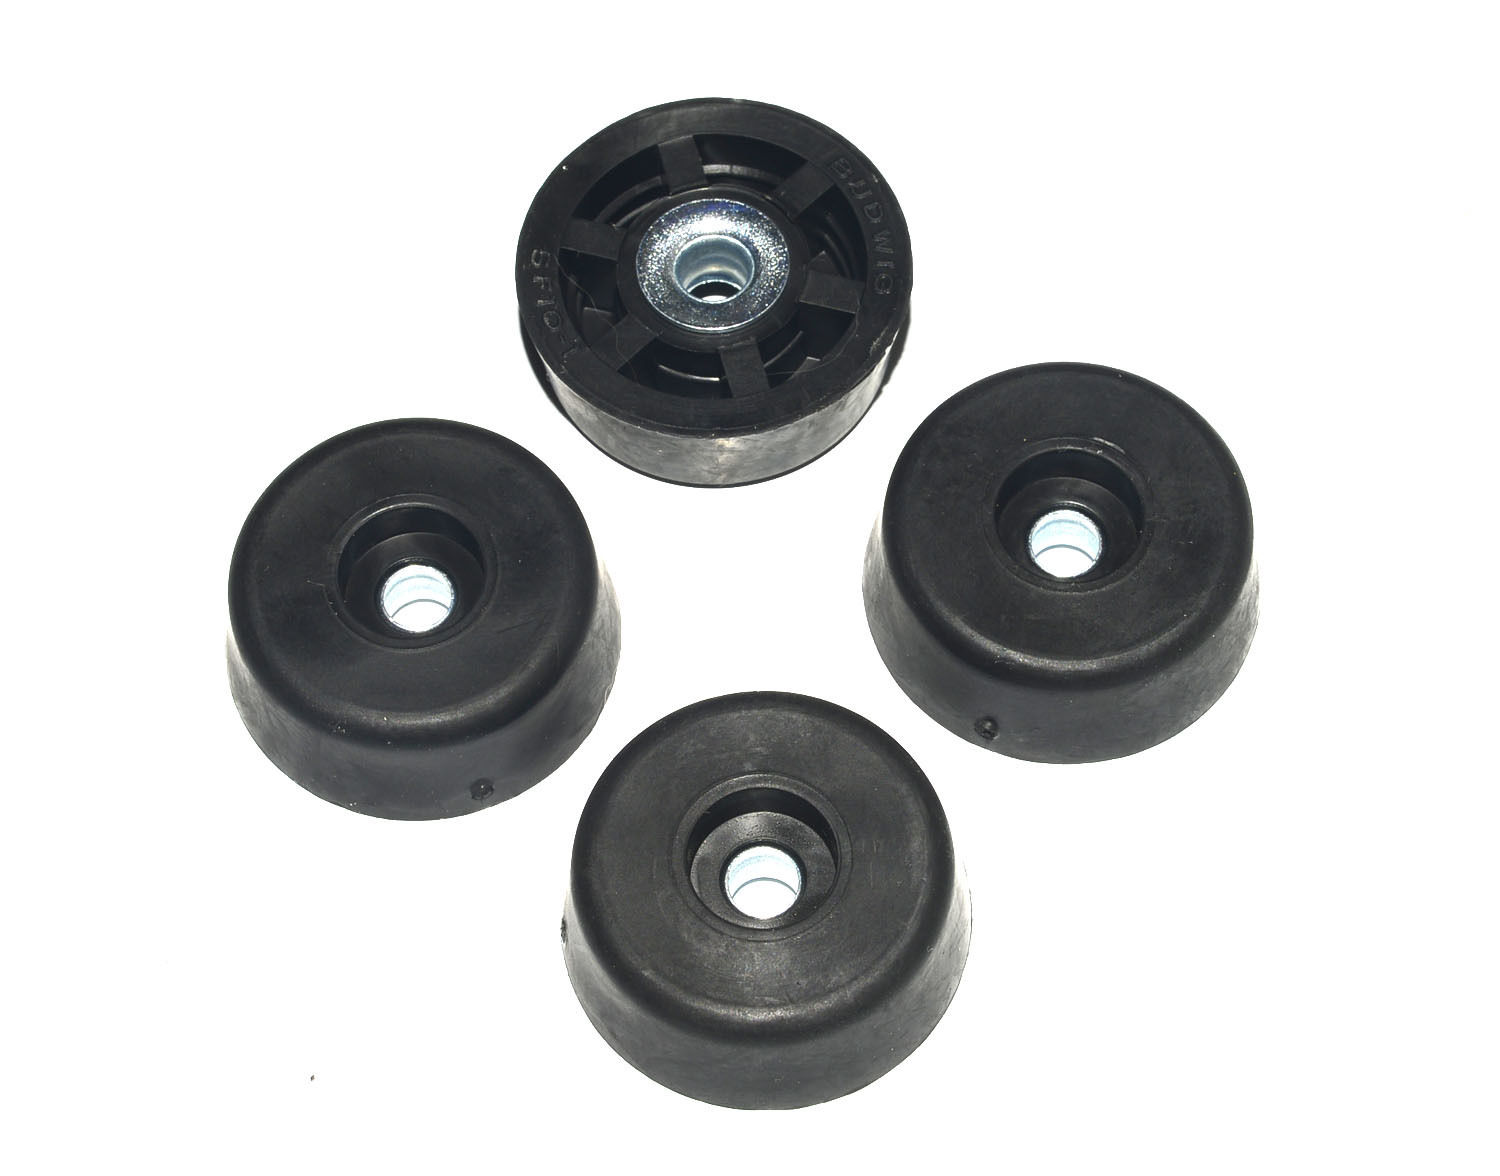 Large Round Rubber Feet - .500 H x 1.312 D